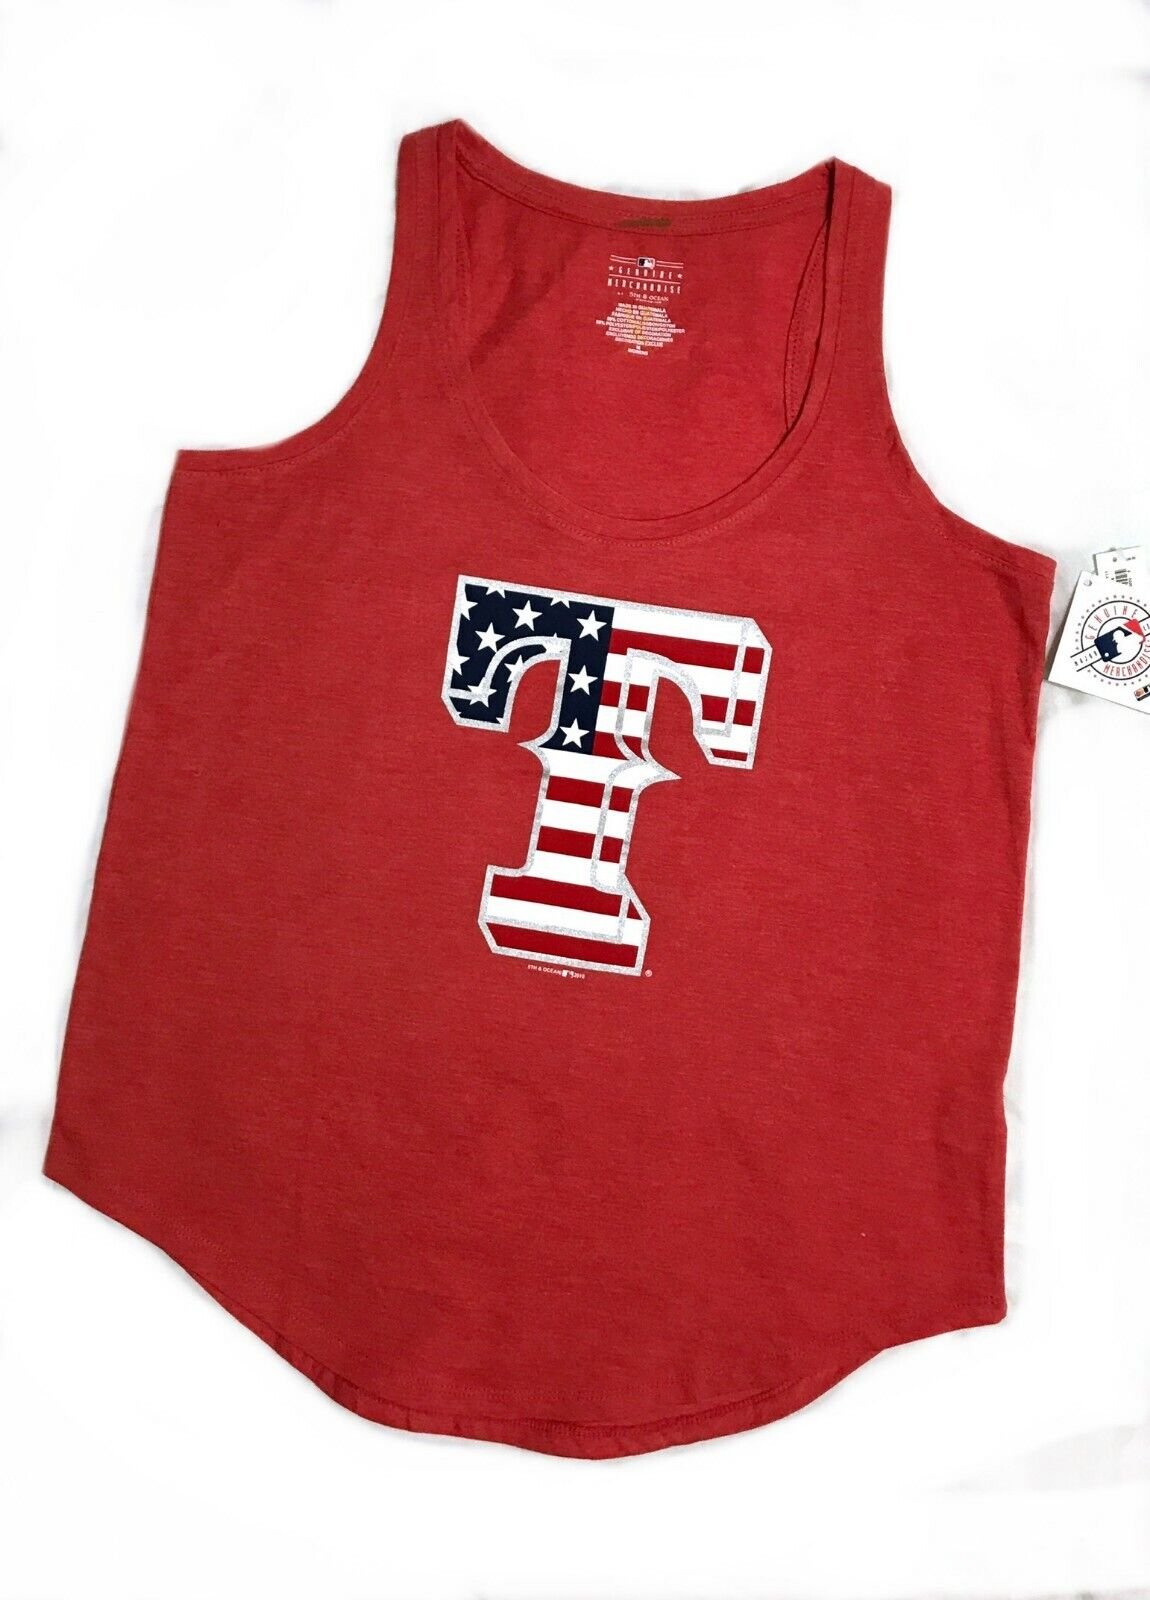 Womens TEXAS RANGERS STARS AND STRIPES TANK TOP american flag red T racerback